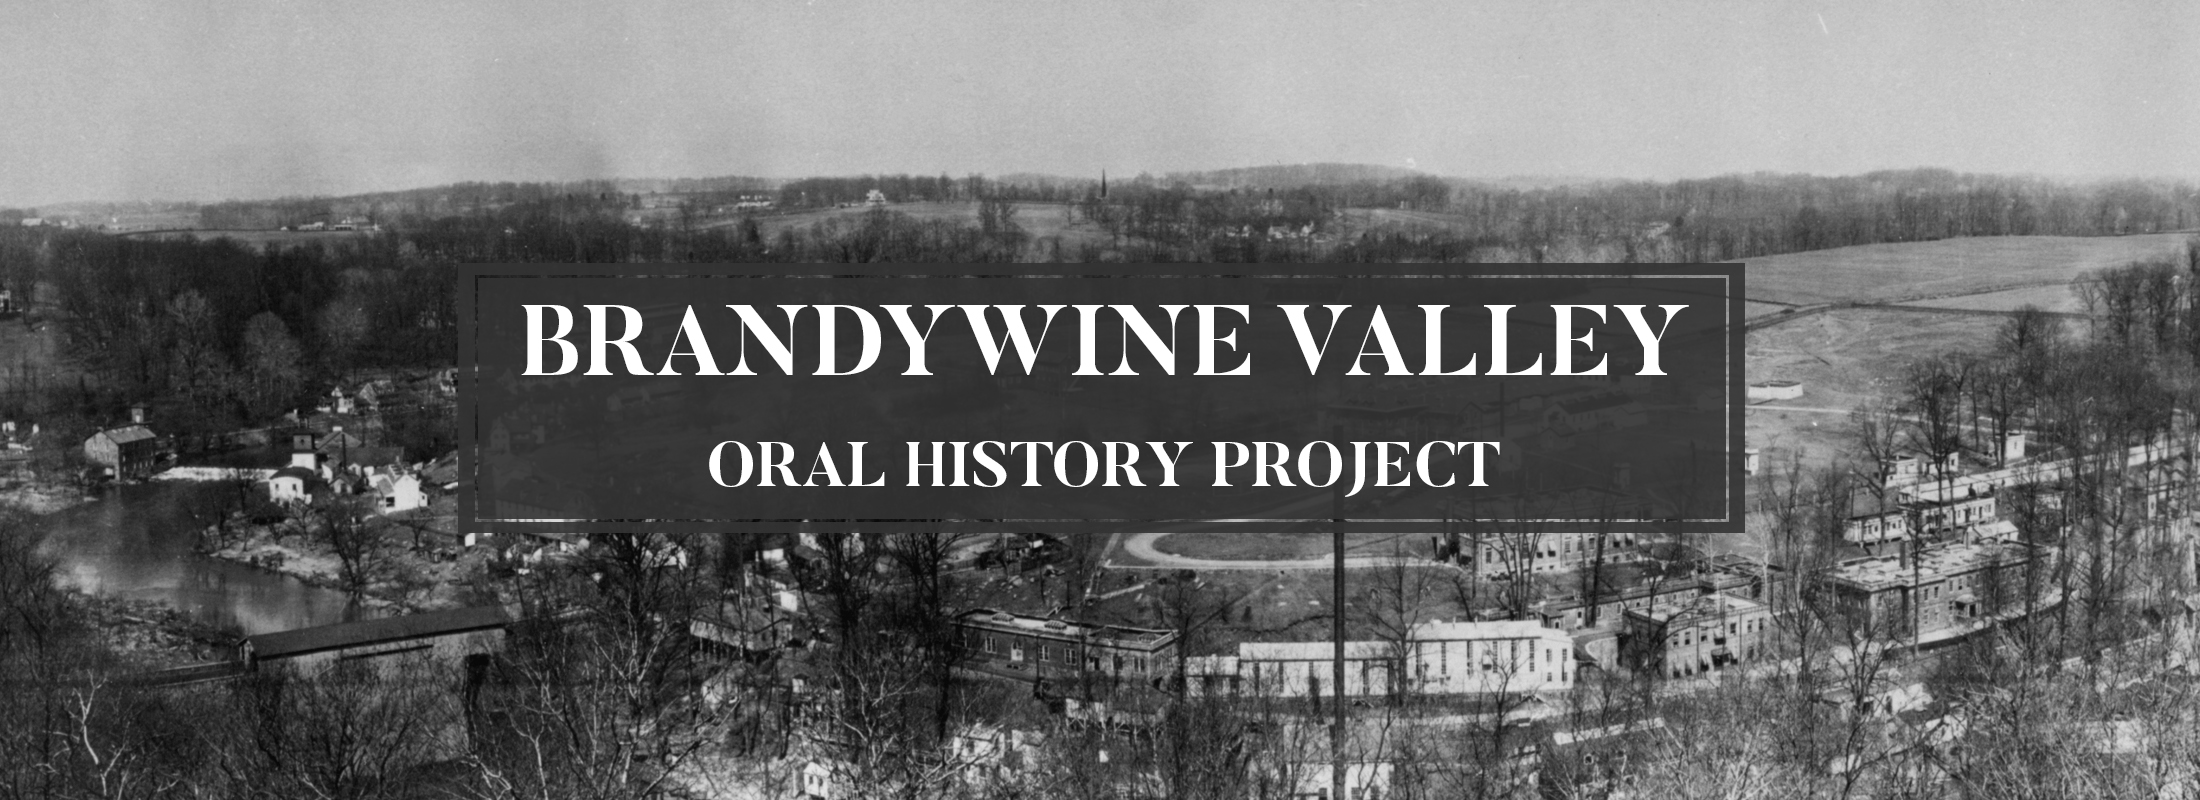 Brandywine Valley Oral History Project